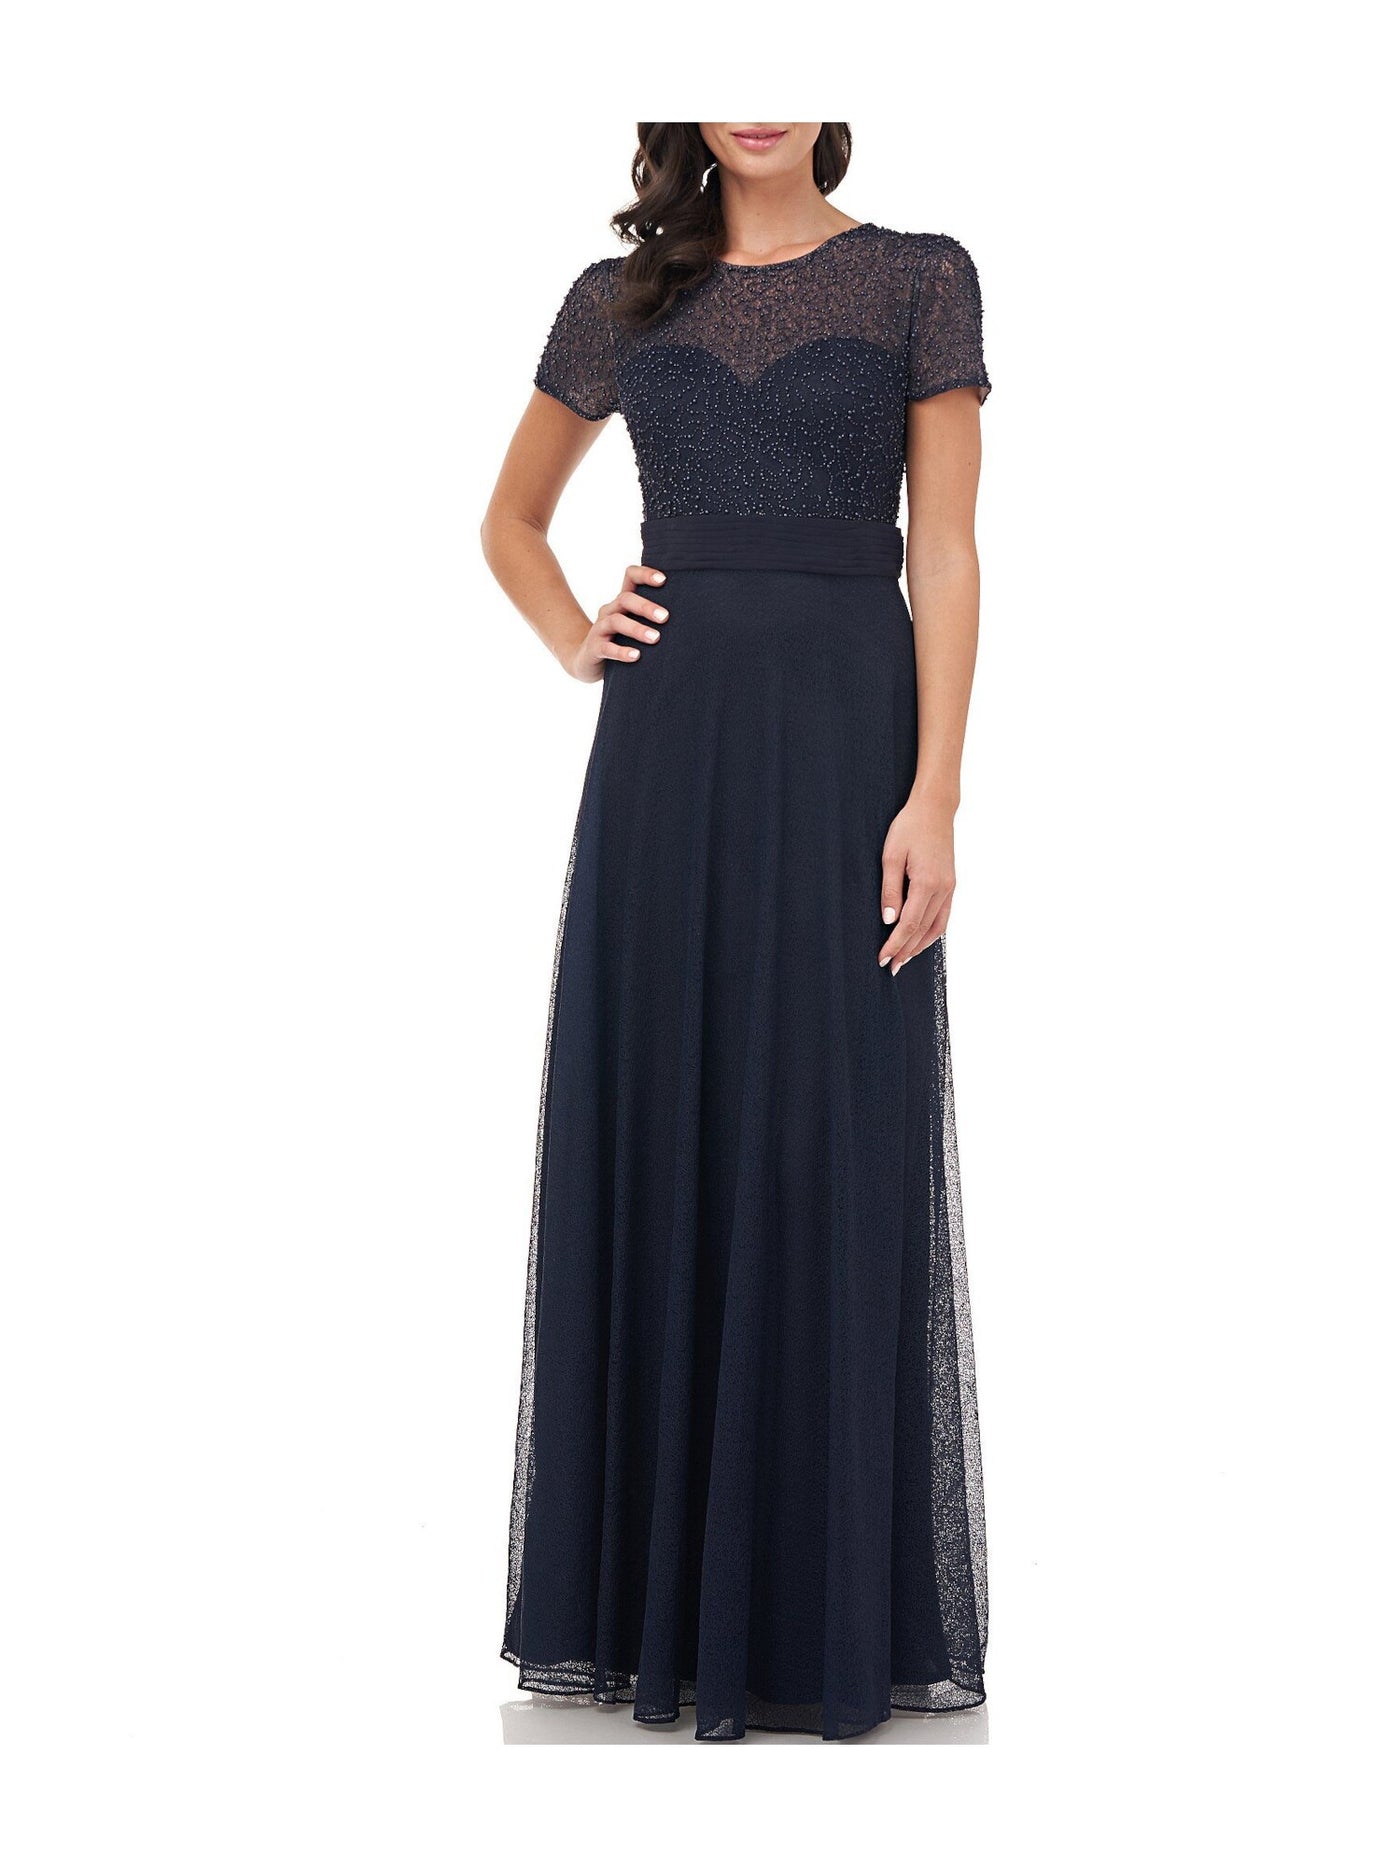 JS COLLECTIONS Womens Navy Embellished Zippered Gown Short Sleeve Illusion Neckline Full-Length Evening Fit + Flare Dress 4